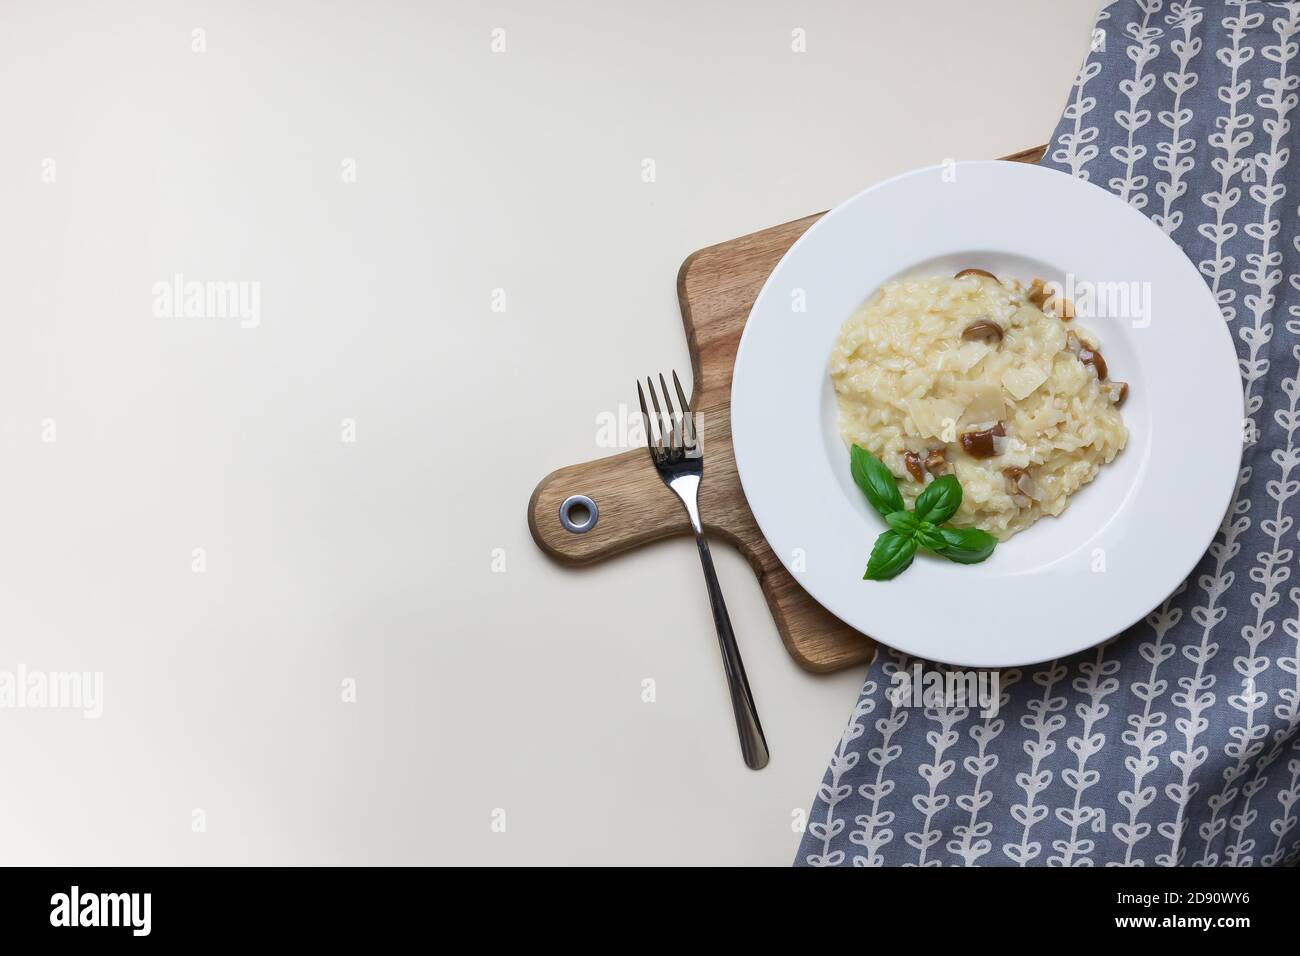 Vegetarian gourmet mushroom risotto on a white plate, yellow background, view from above. Risotto is a northern Italian rice dish cooked with broth until it reaches a creamy consistency. Stock Photo